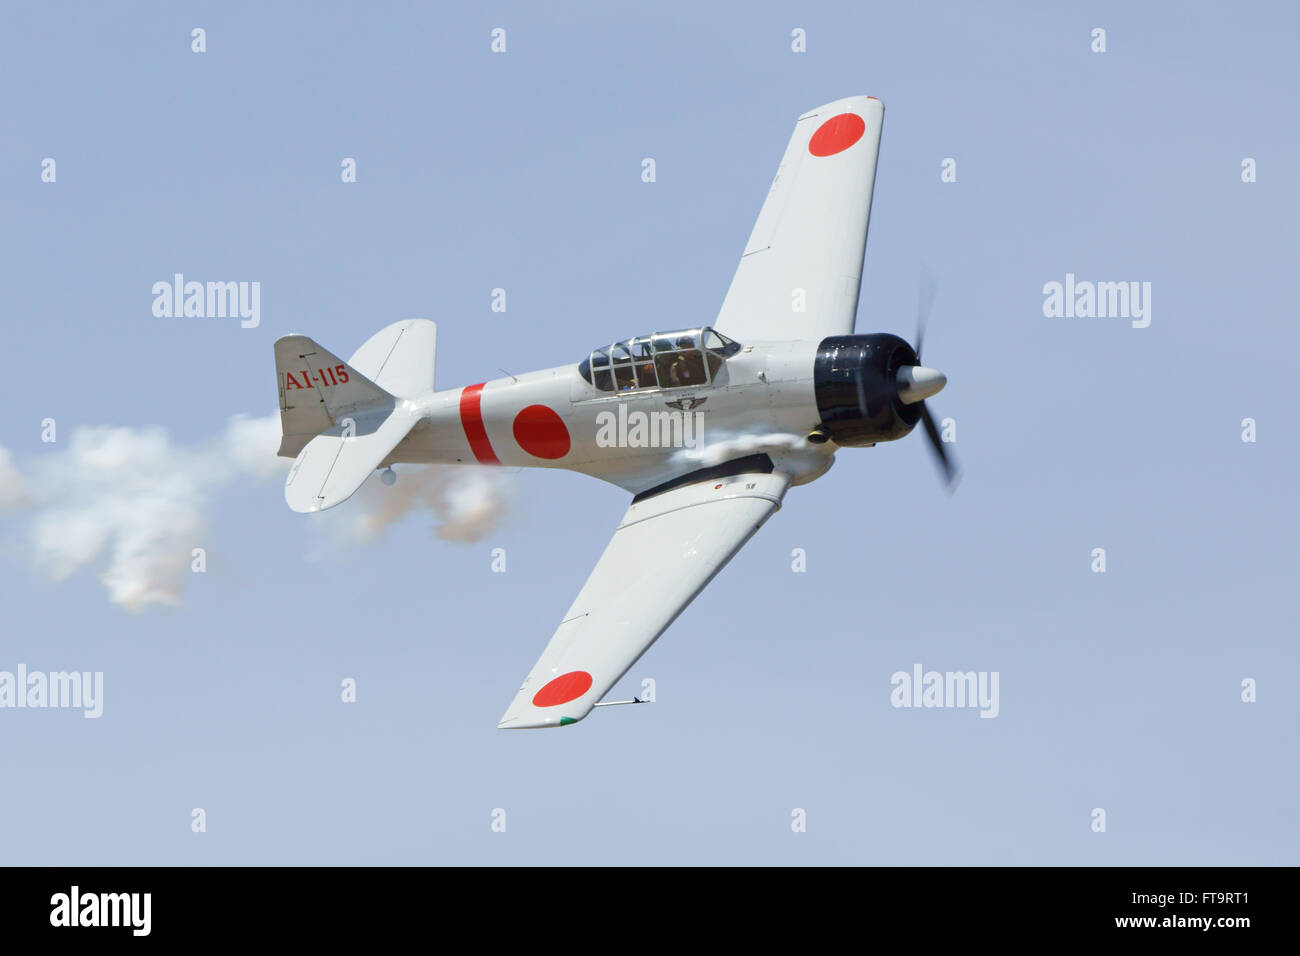 Airplane WWII Japan Zero fighter vintage aircraft flying at 2016 Los Angeles Air Show in California Stock Photo